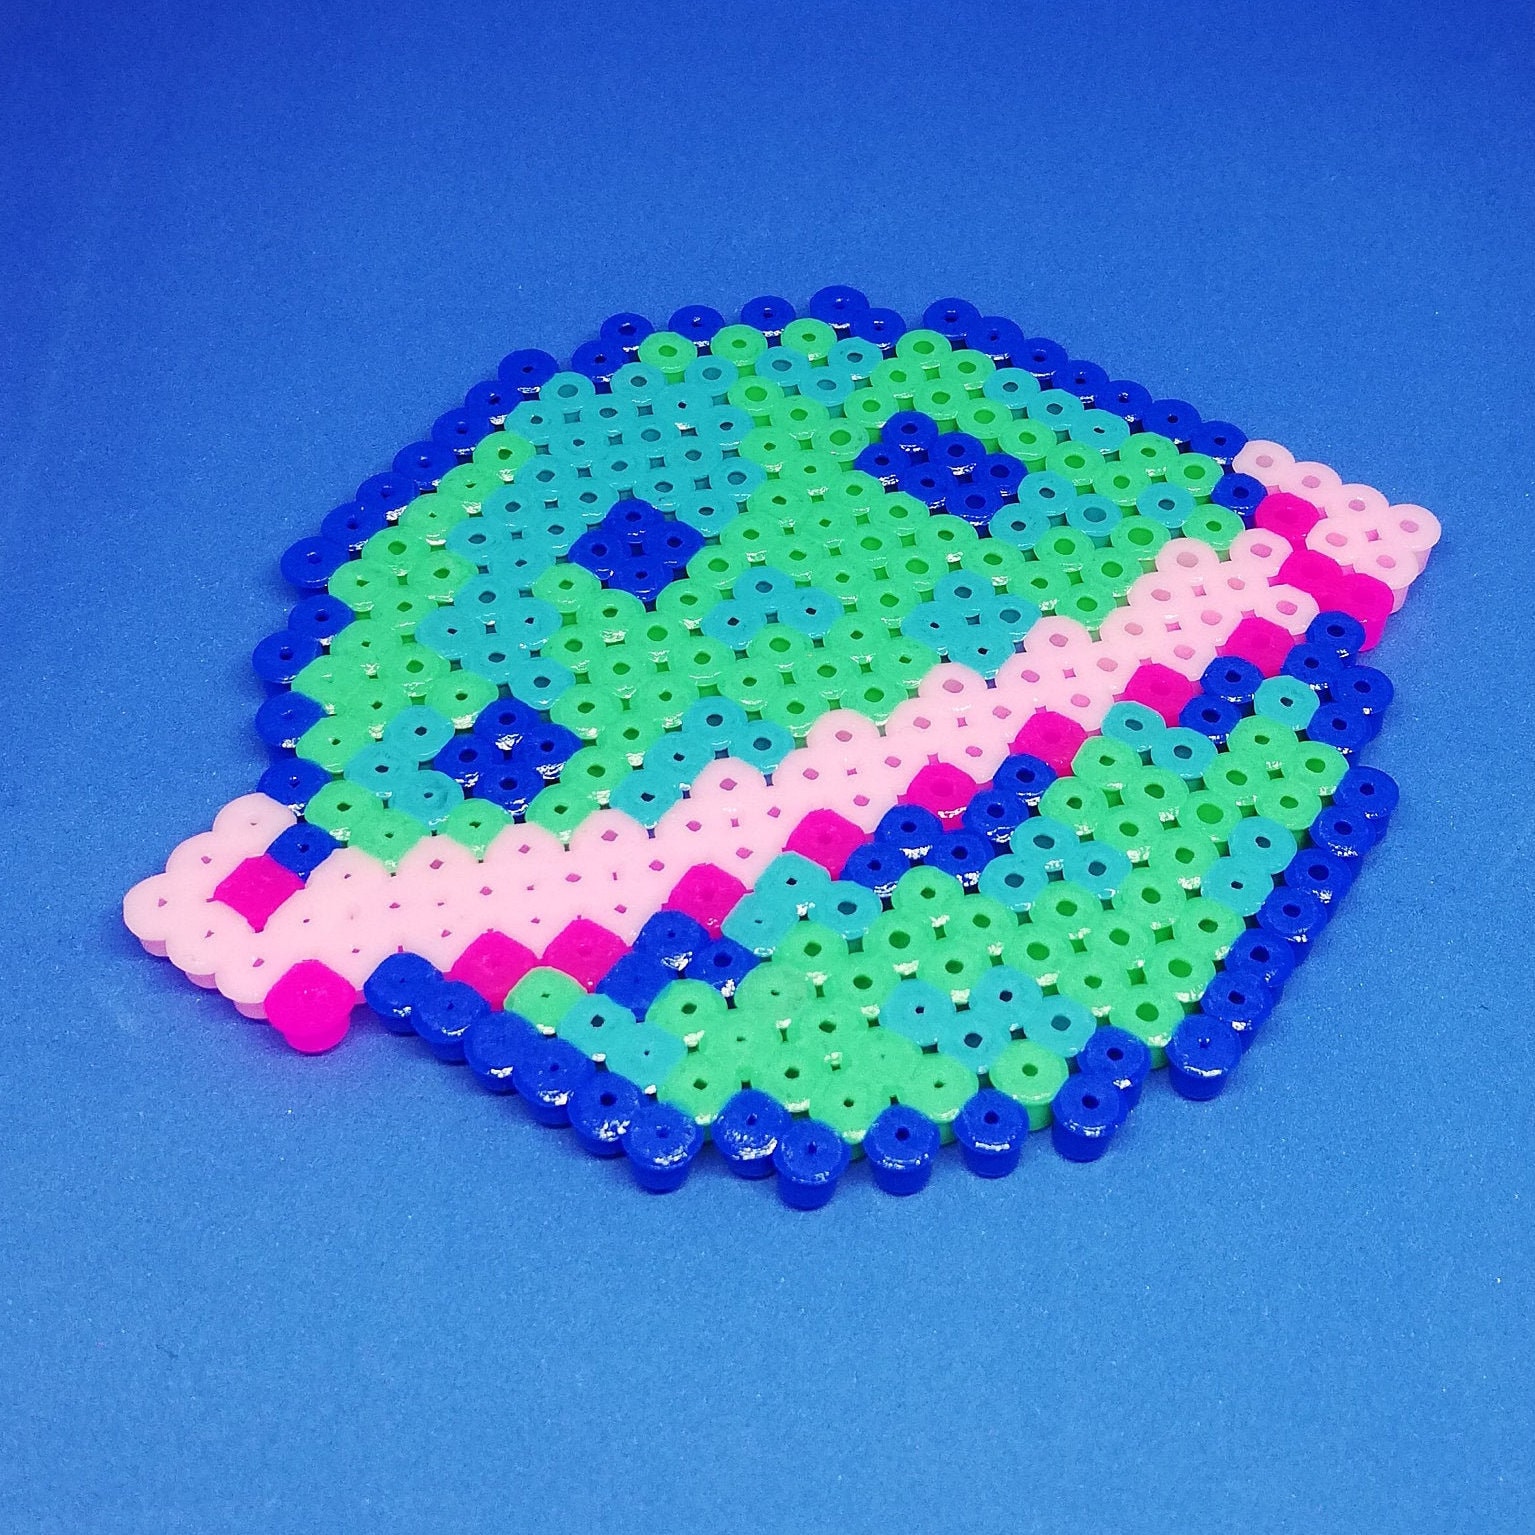 Flower Pixel Bead Coaster Choose Your Favourite or Set of 4 